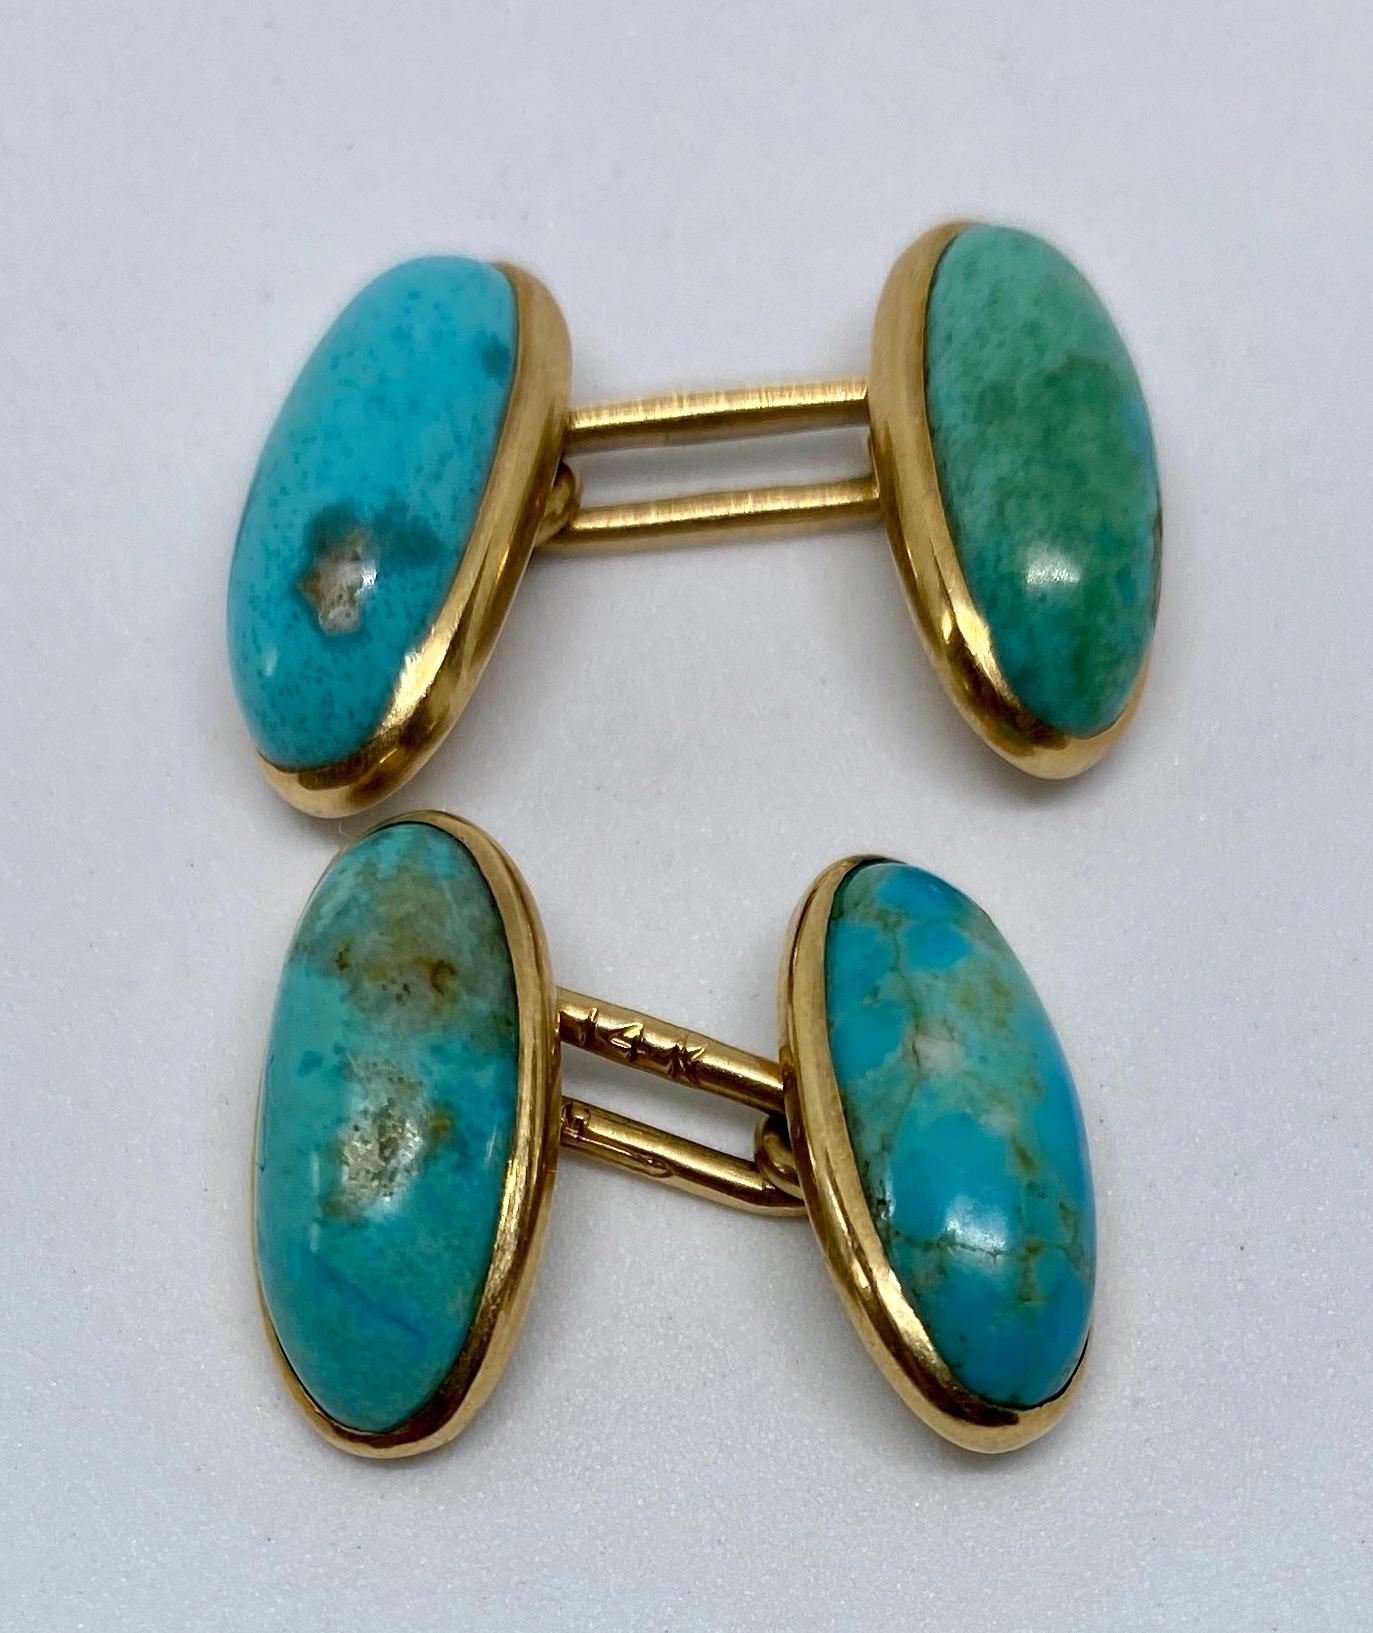 Rare, highly unusual, elongated oval cufflinks featuring four bright blue turquoise cabochons in 14K rose gold settings by Larter & Sons.

The oval faces each measure 16mm by 8mm; together, the cufflinks weigh 6.93 grams.

They bear the Larter &